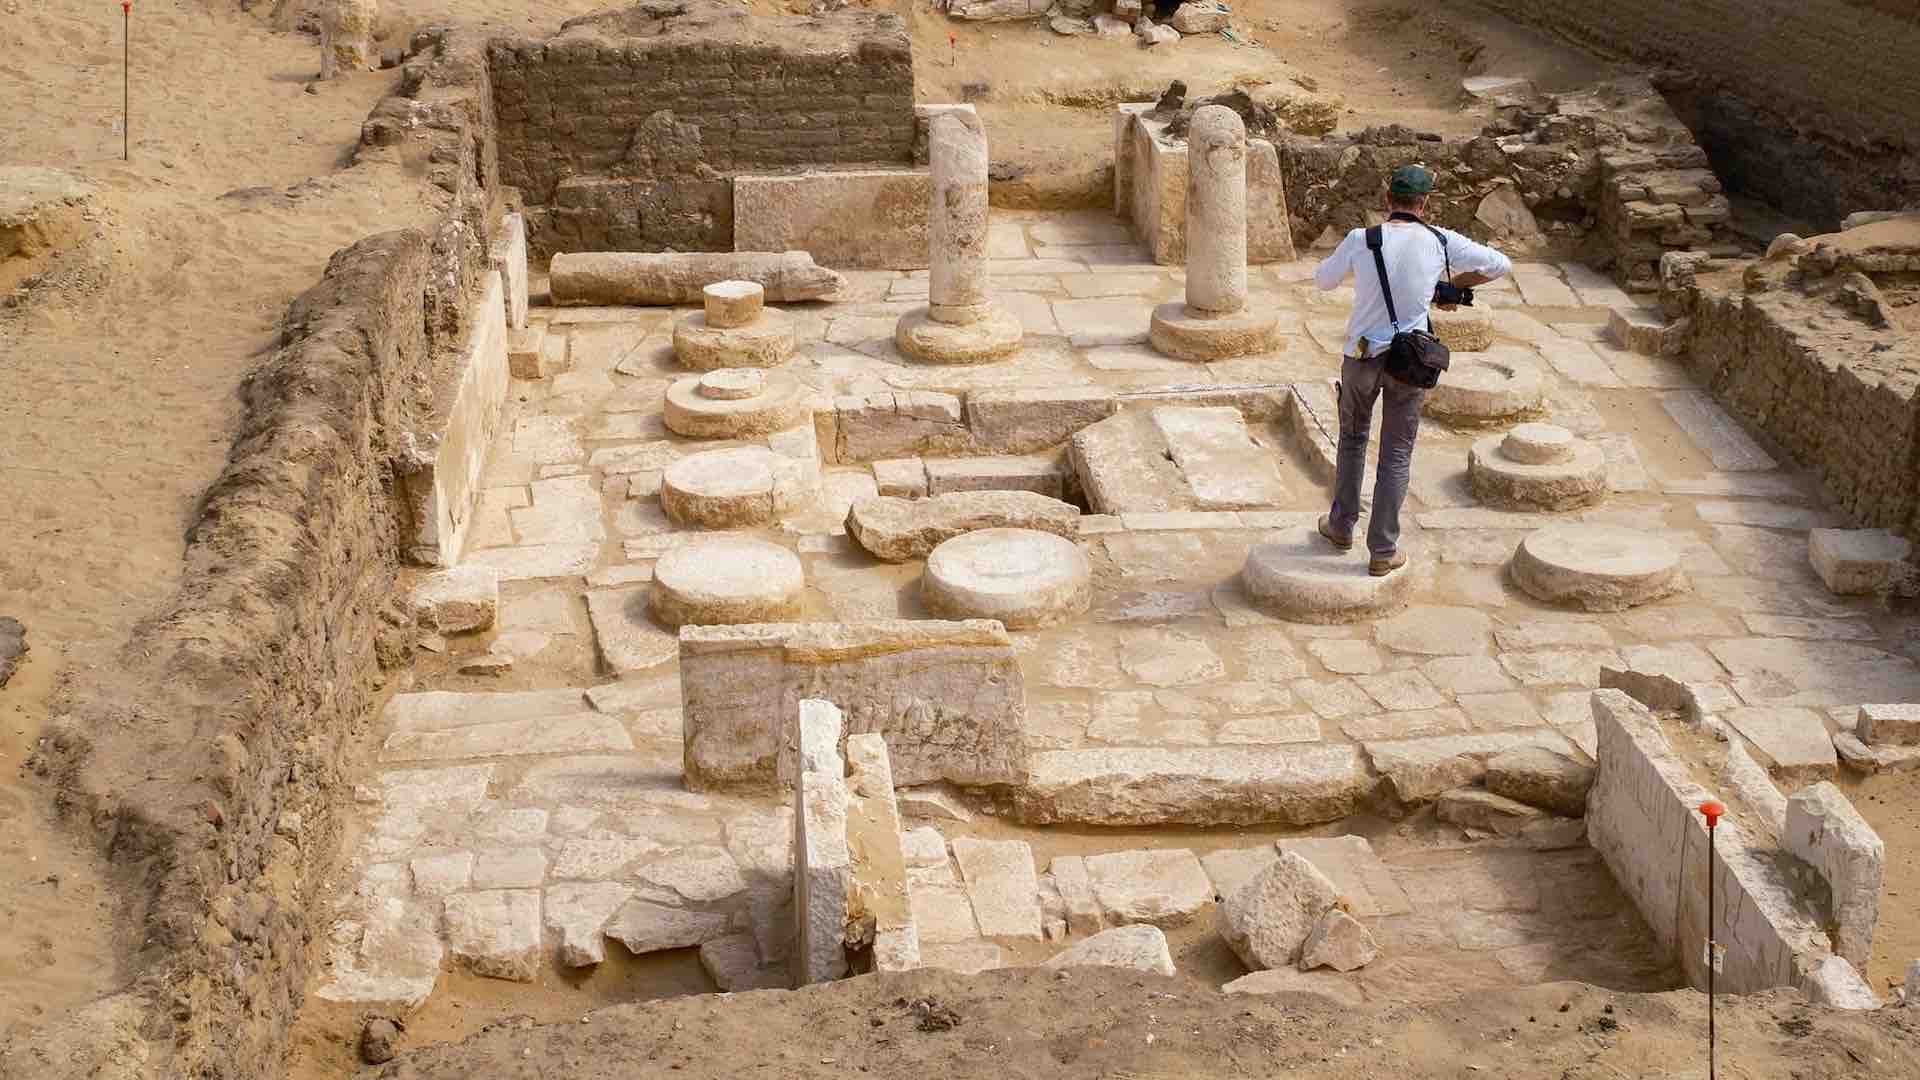 Ancient Egyptian tomb of Amun Temple steward uncovered in Saqqara Necropolis